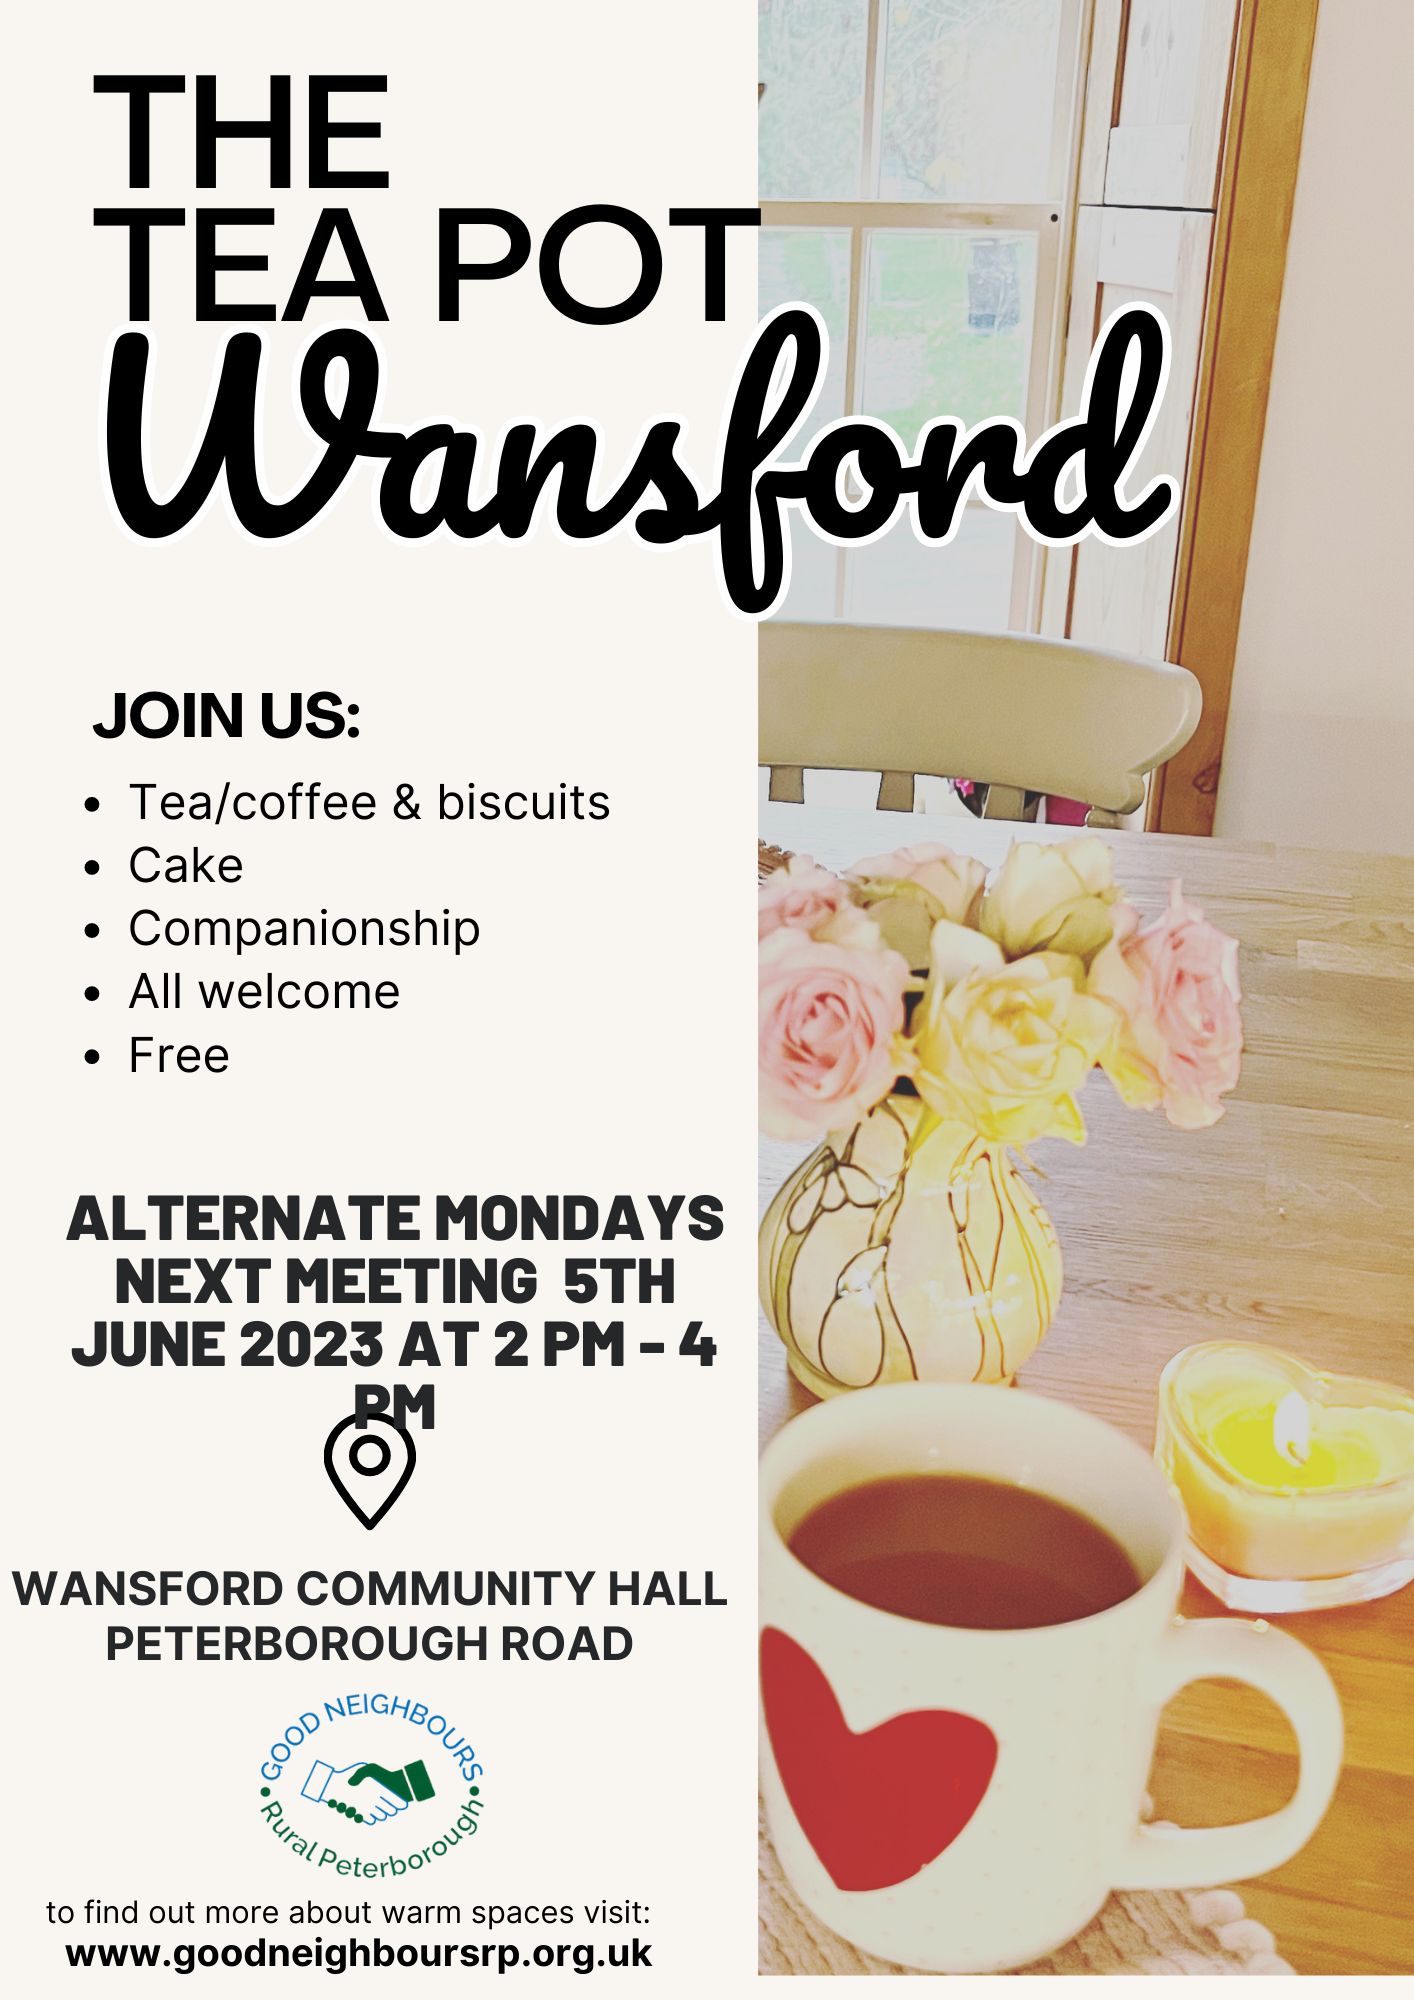 Next session of the Teapot on Monday, 5 June 2023 at 2 p.m. in the Community Hall!